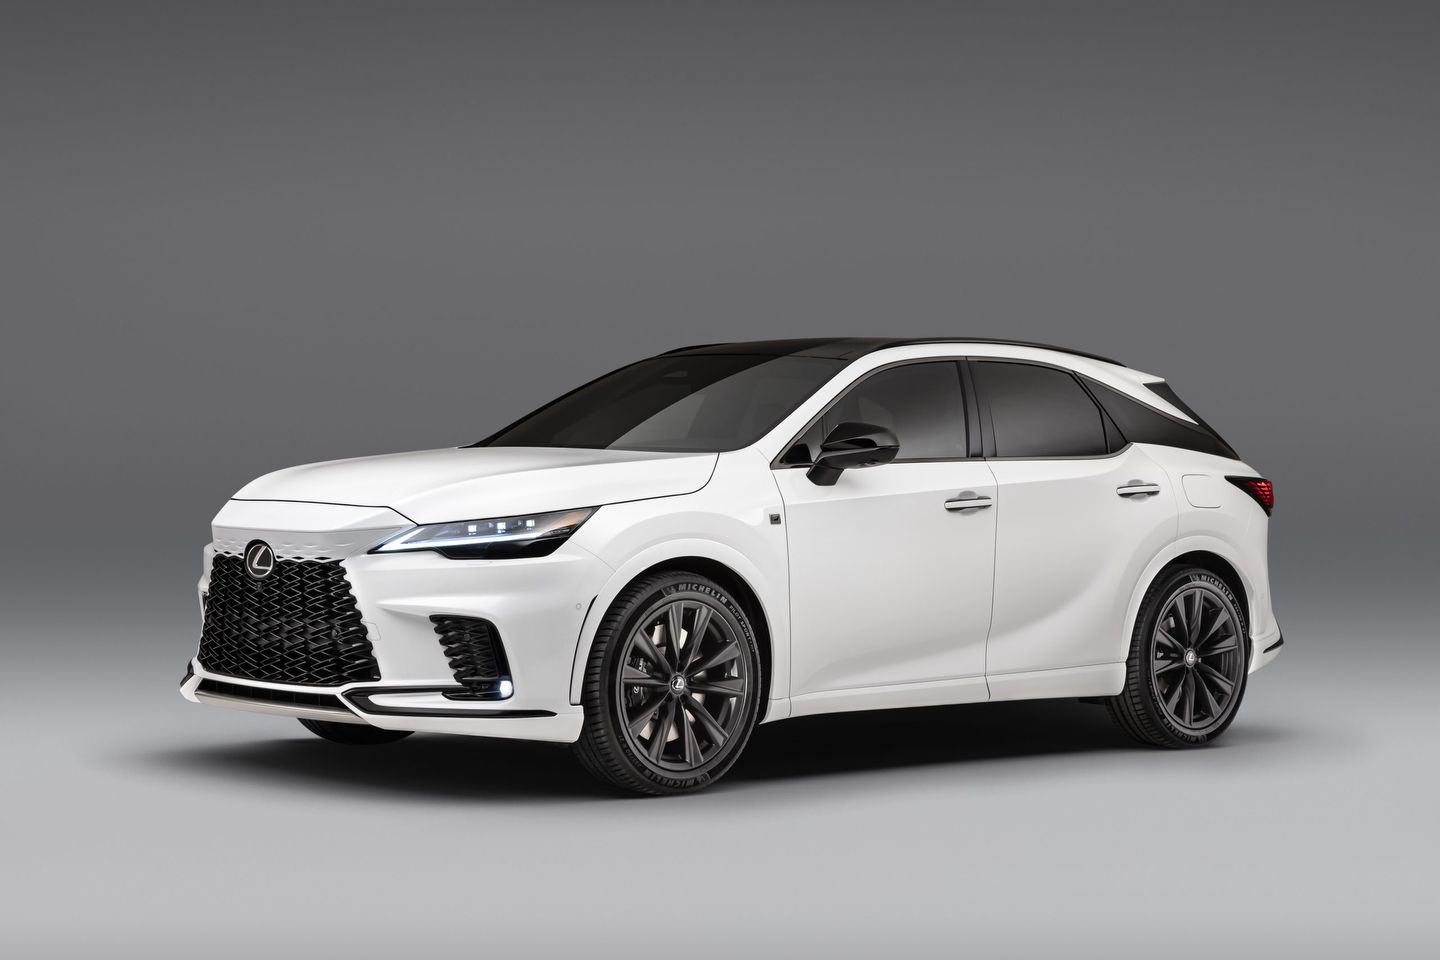 This is the all-new generation 2023 Lexus RX